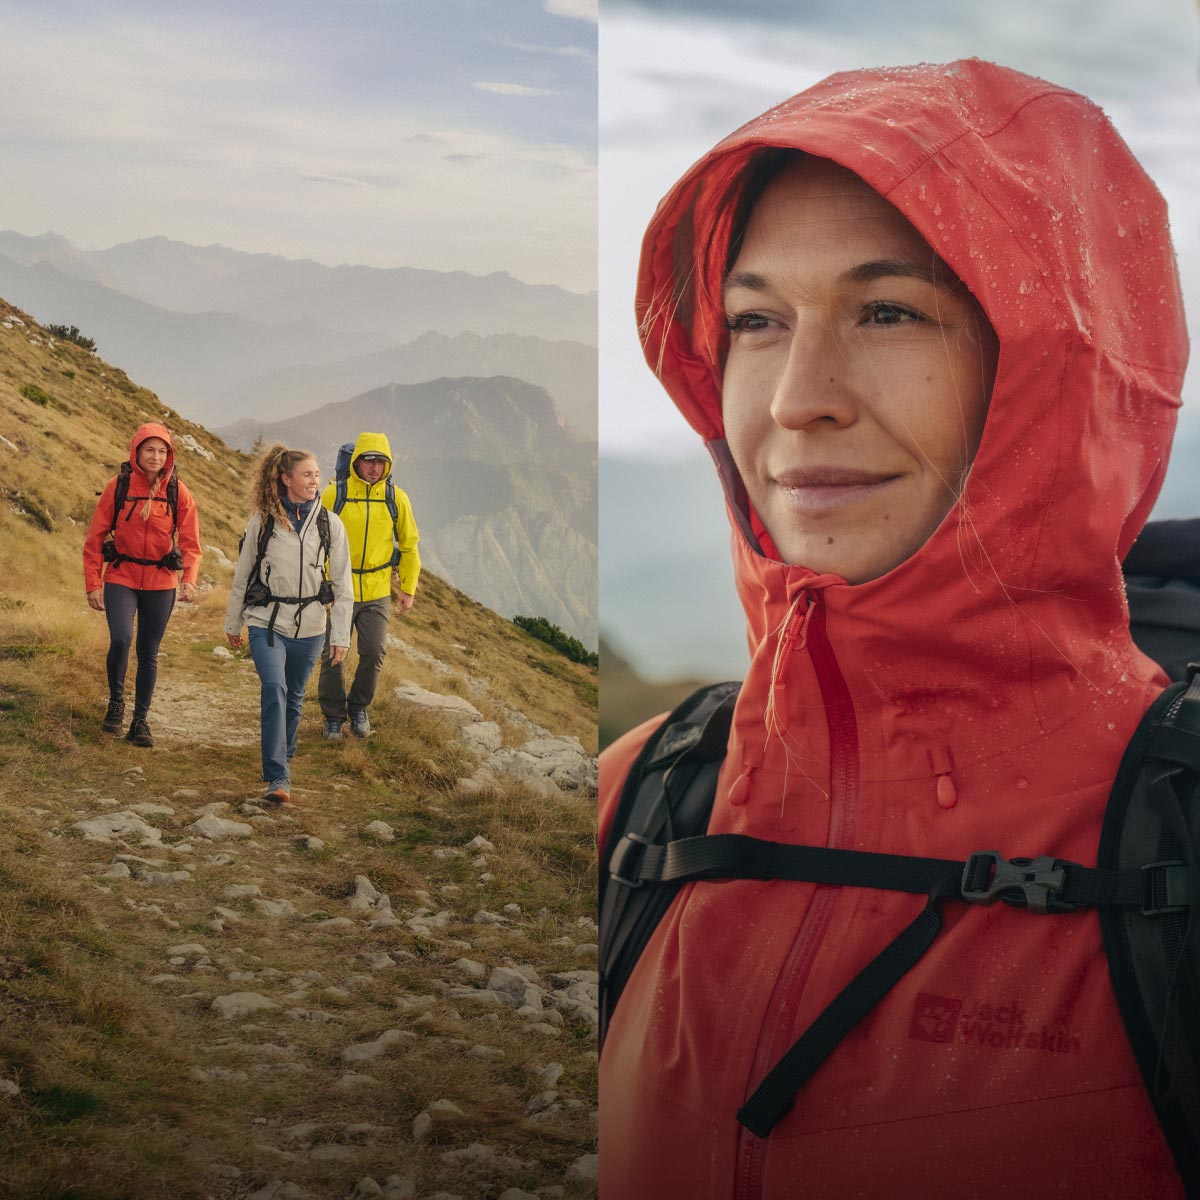 Hiking gear for men, women and kids – Buy Jack Wolfskin Products for hiking  – JACK WOLFSKIN